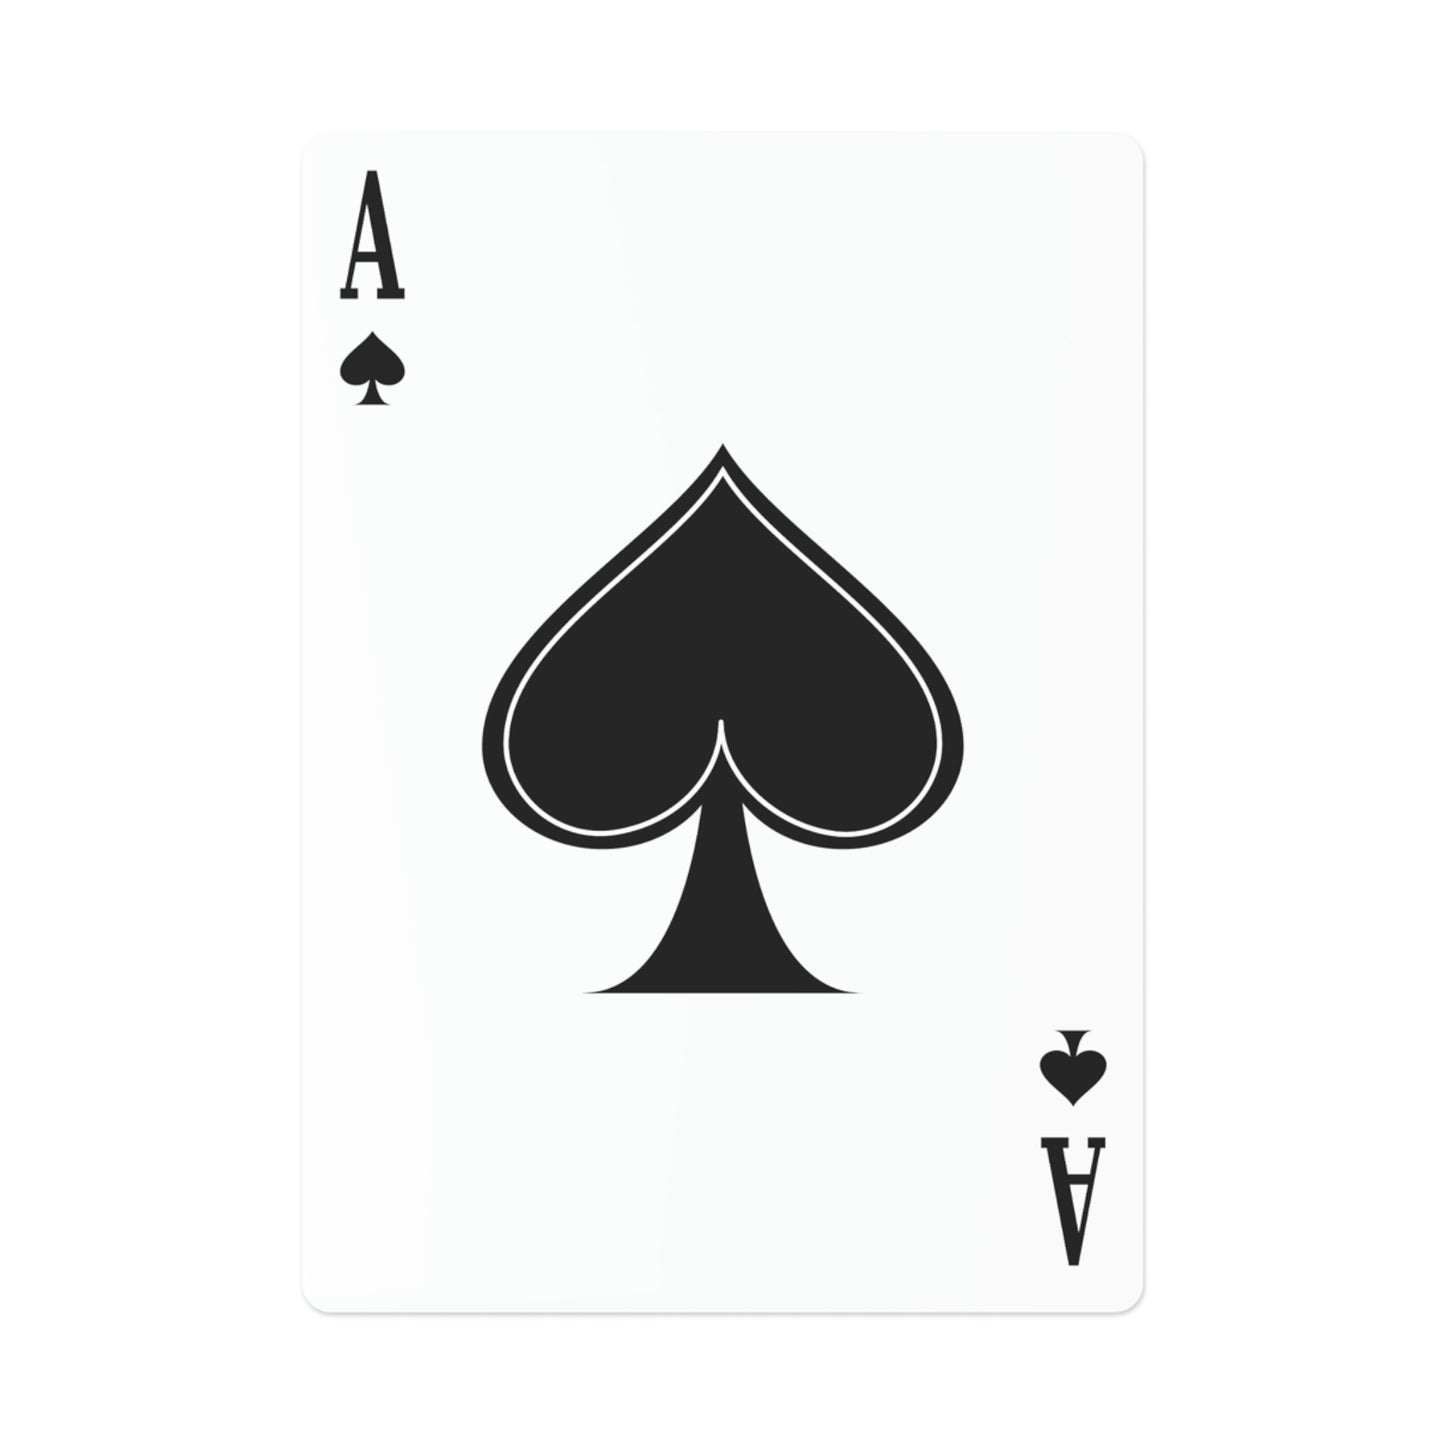 Fully Staffed - Playing Cards